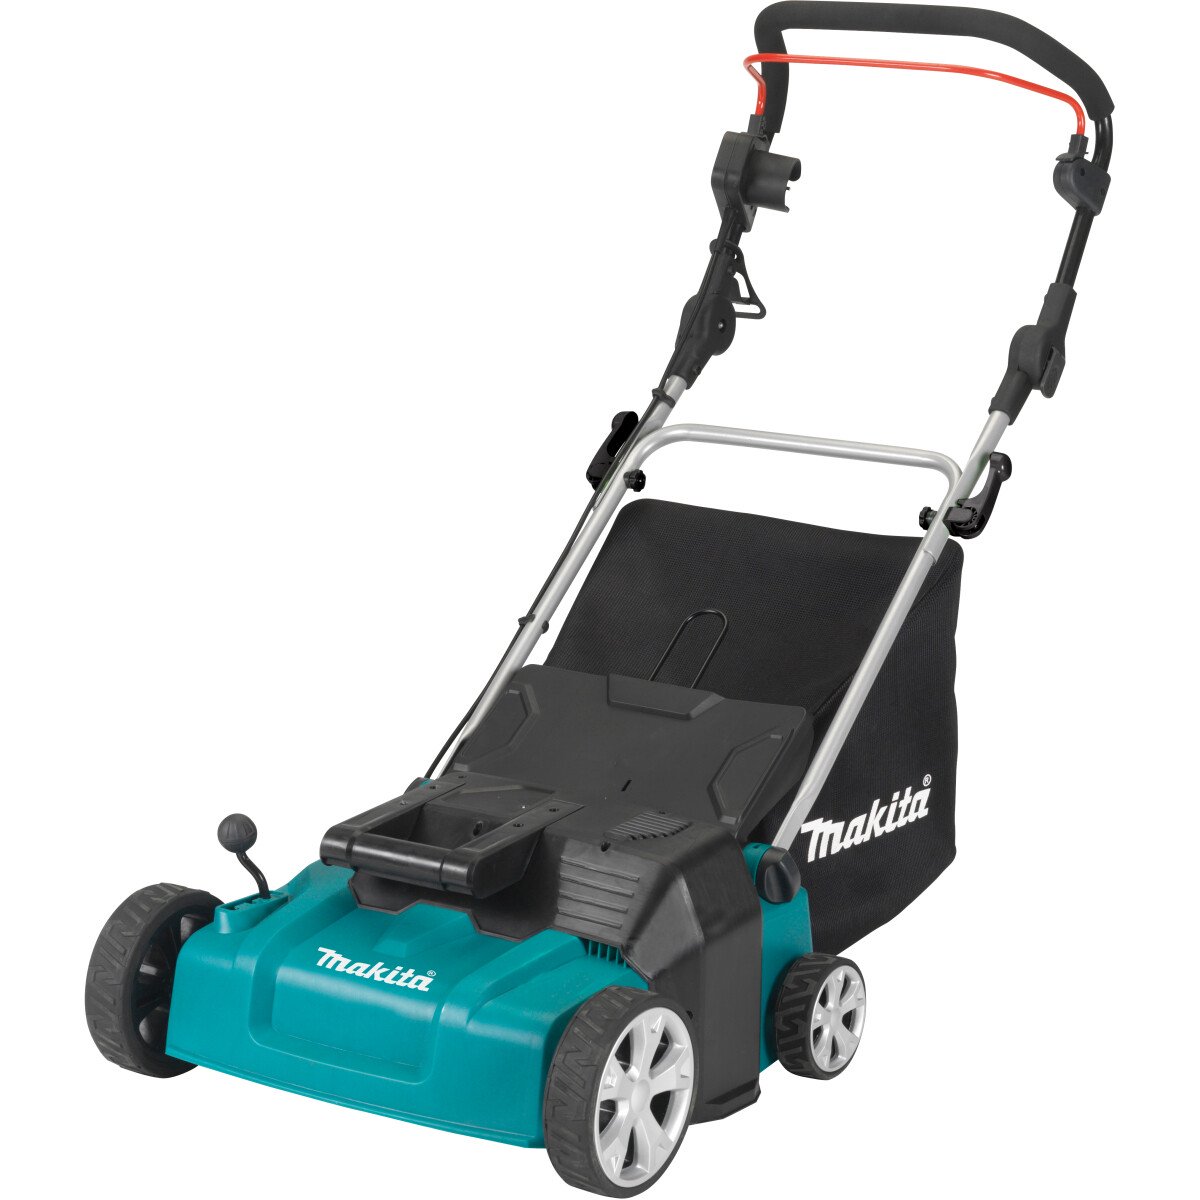 Makita UV3600 240V Electric Scarifier with Cutting Width of 36cm